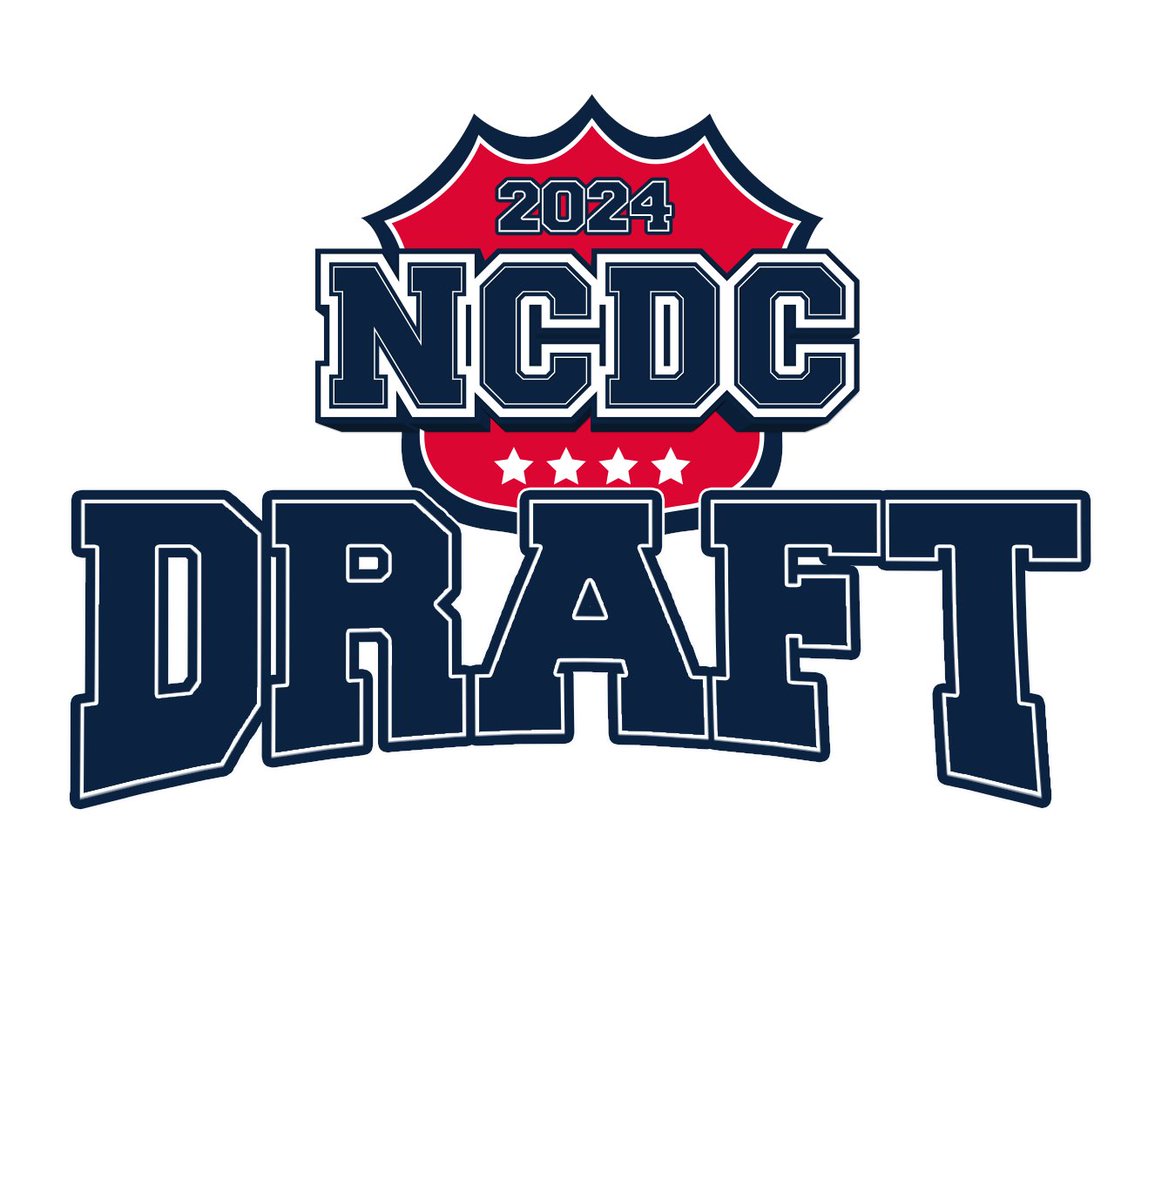 We are within an hour of the start of the #NCDCDraft! Don't forget to go on the USPHL YouTube Channel for @The_DanKShow's live coverage. 

We'll be posting the picks here as well on X, up to five picks at a time. 

USPHL YouTube Channel:
youtube.com/channel/UCCOAD…